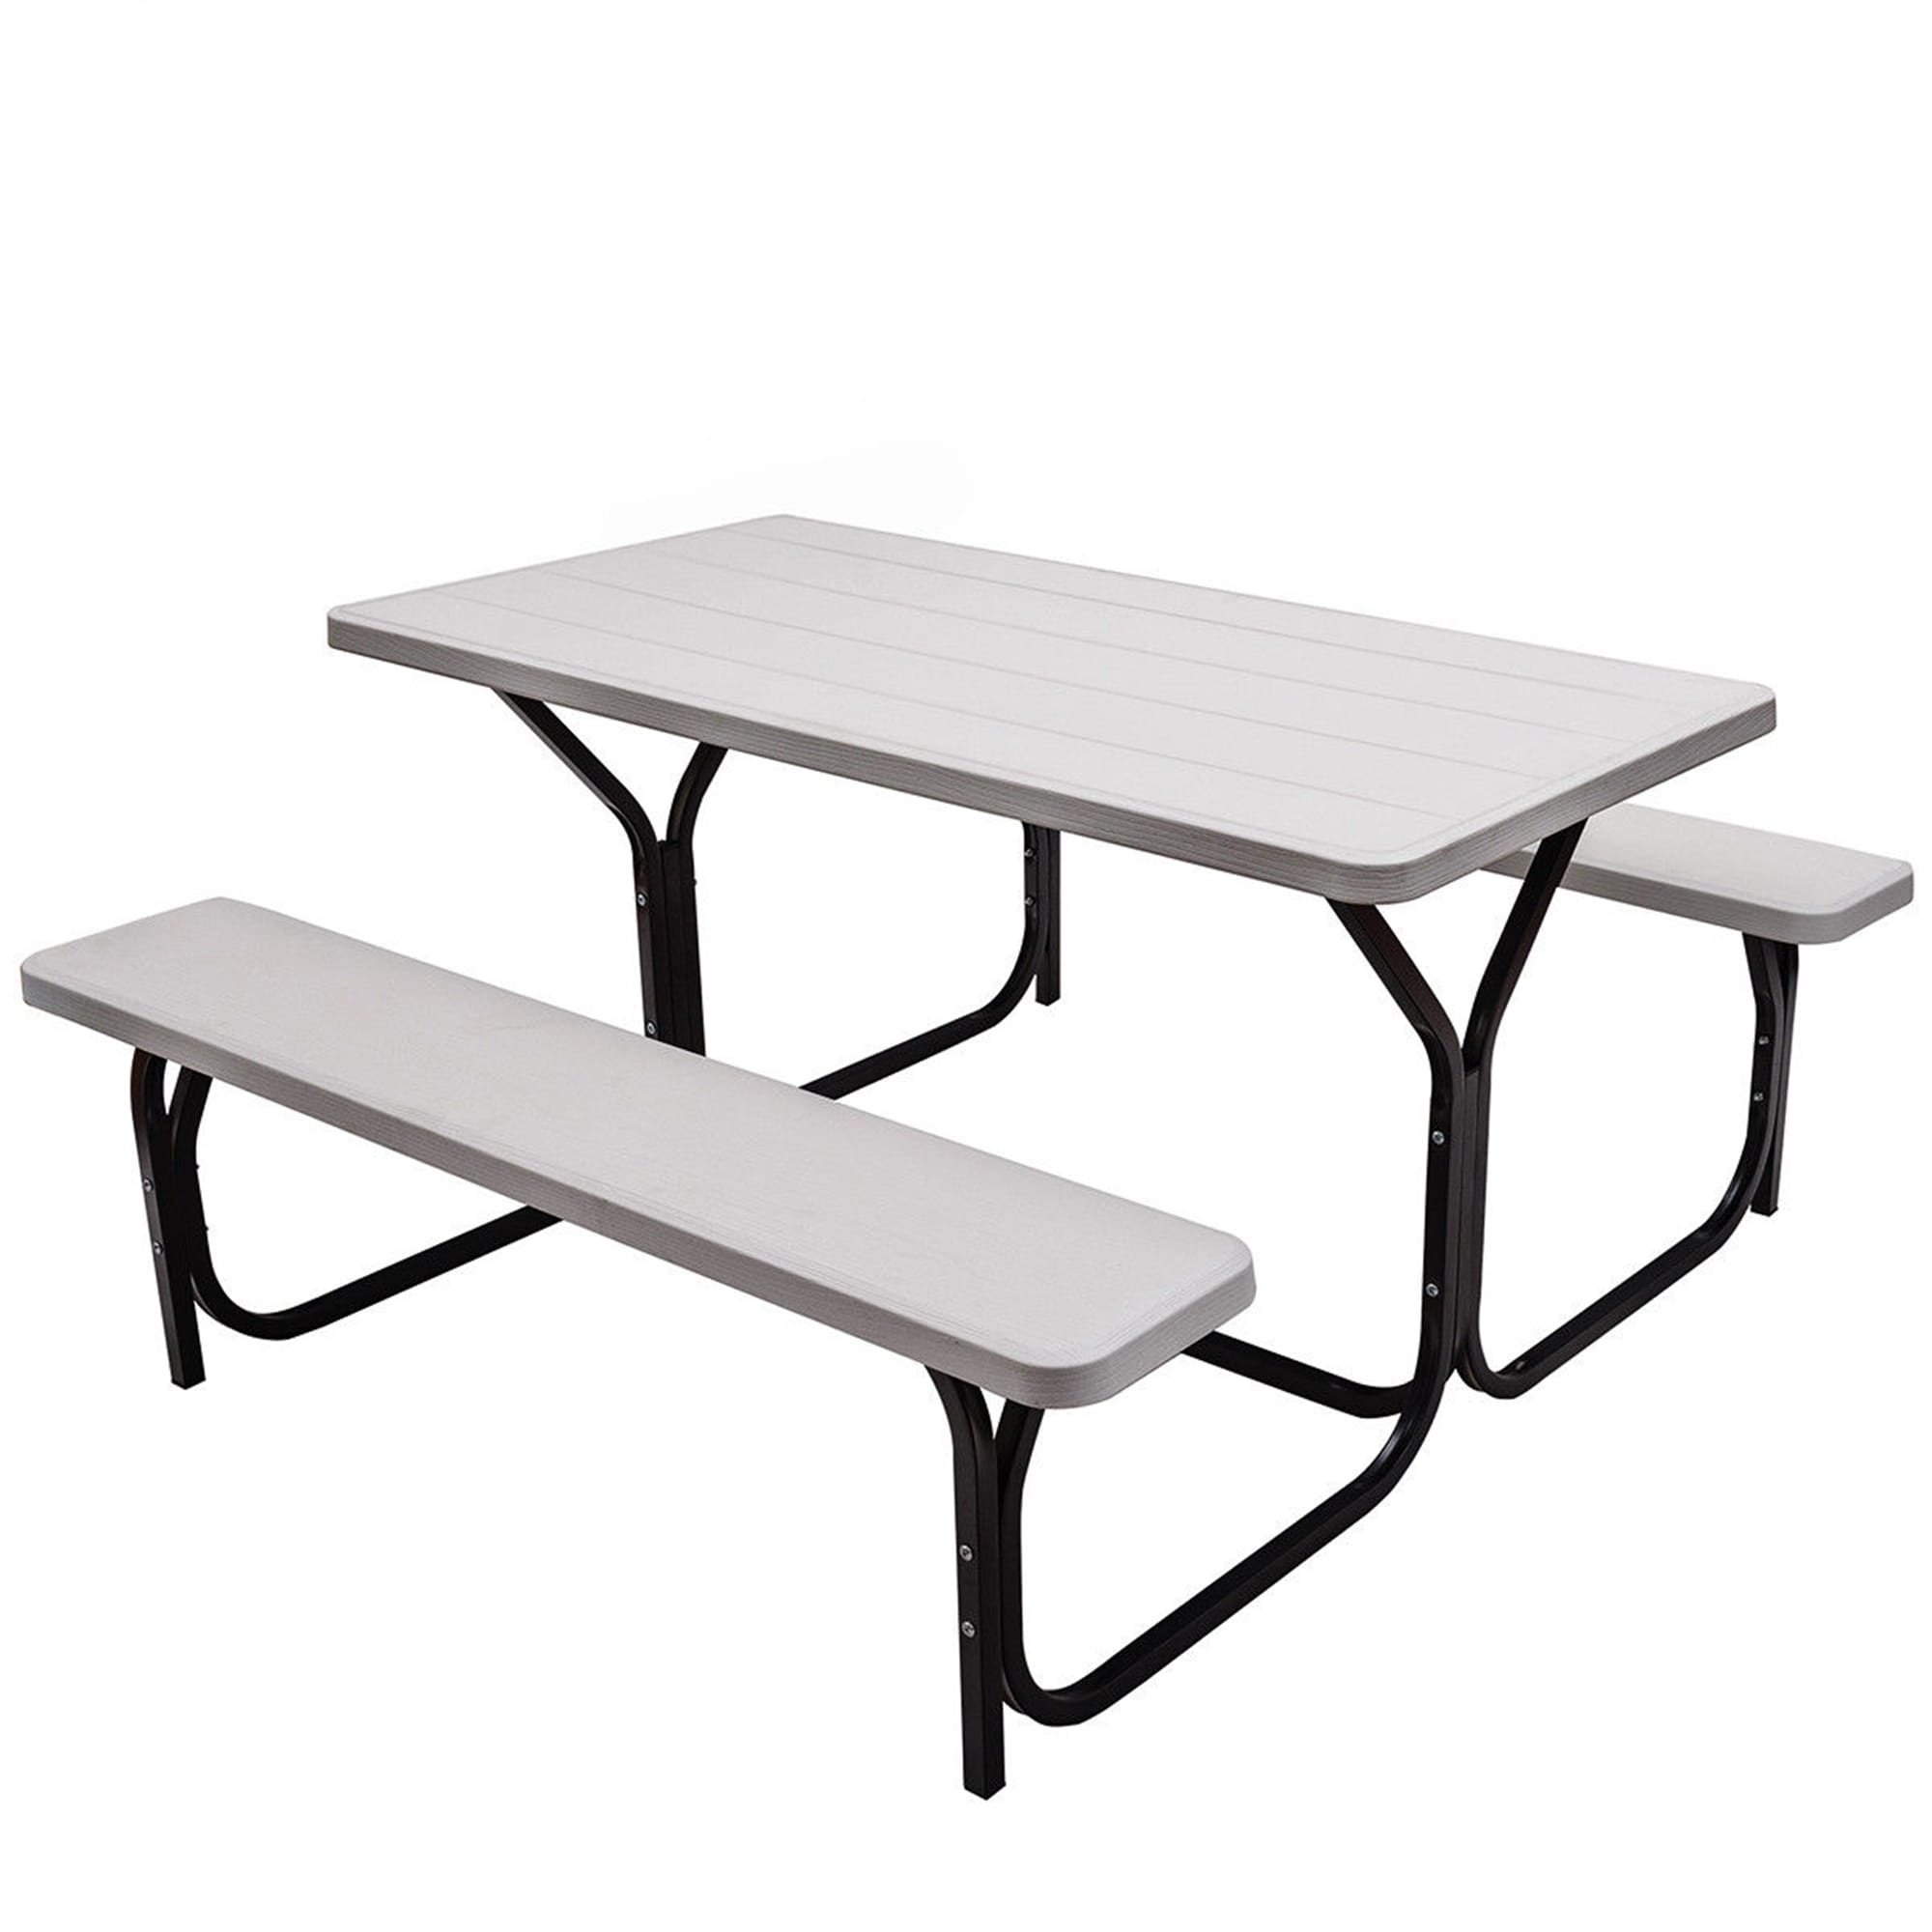 54 X 59 In Black Picnic Table Bench Set For Outdoor Camping